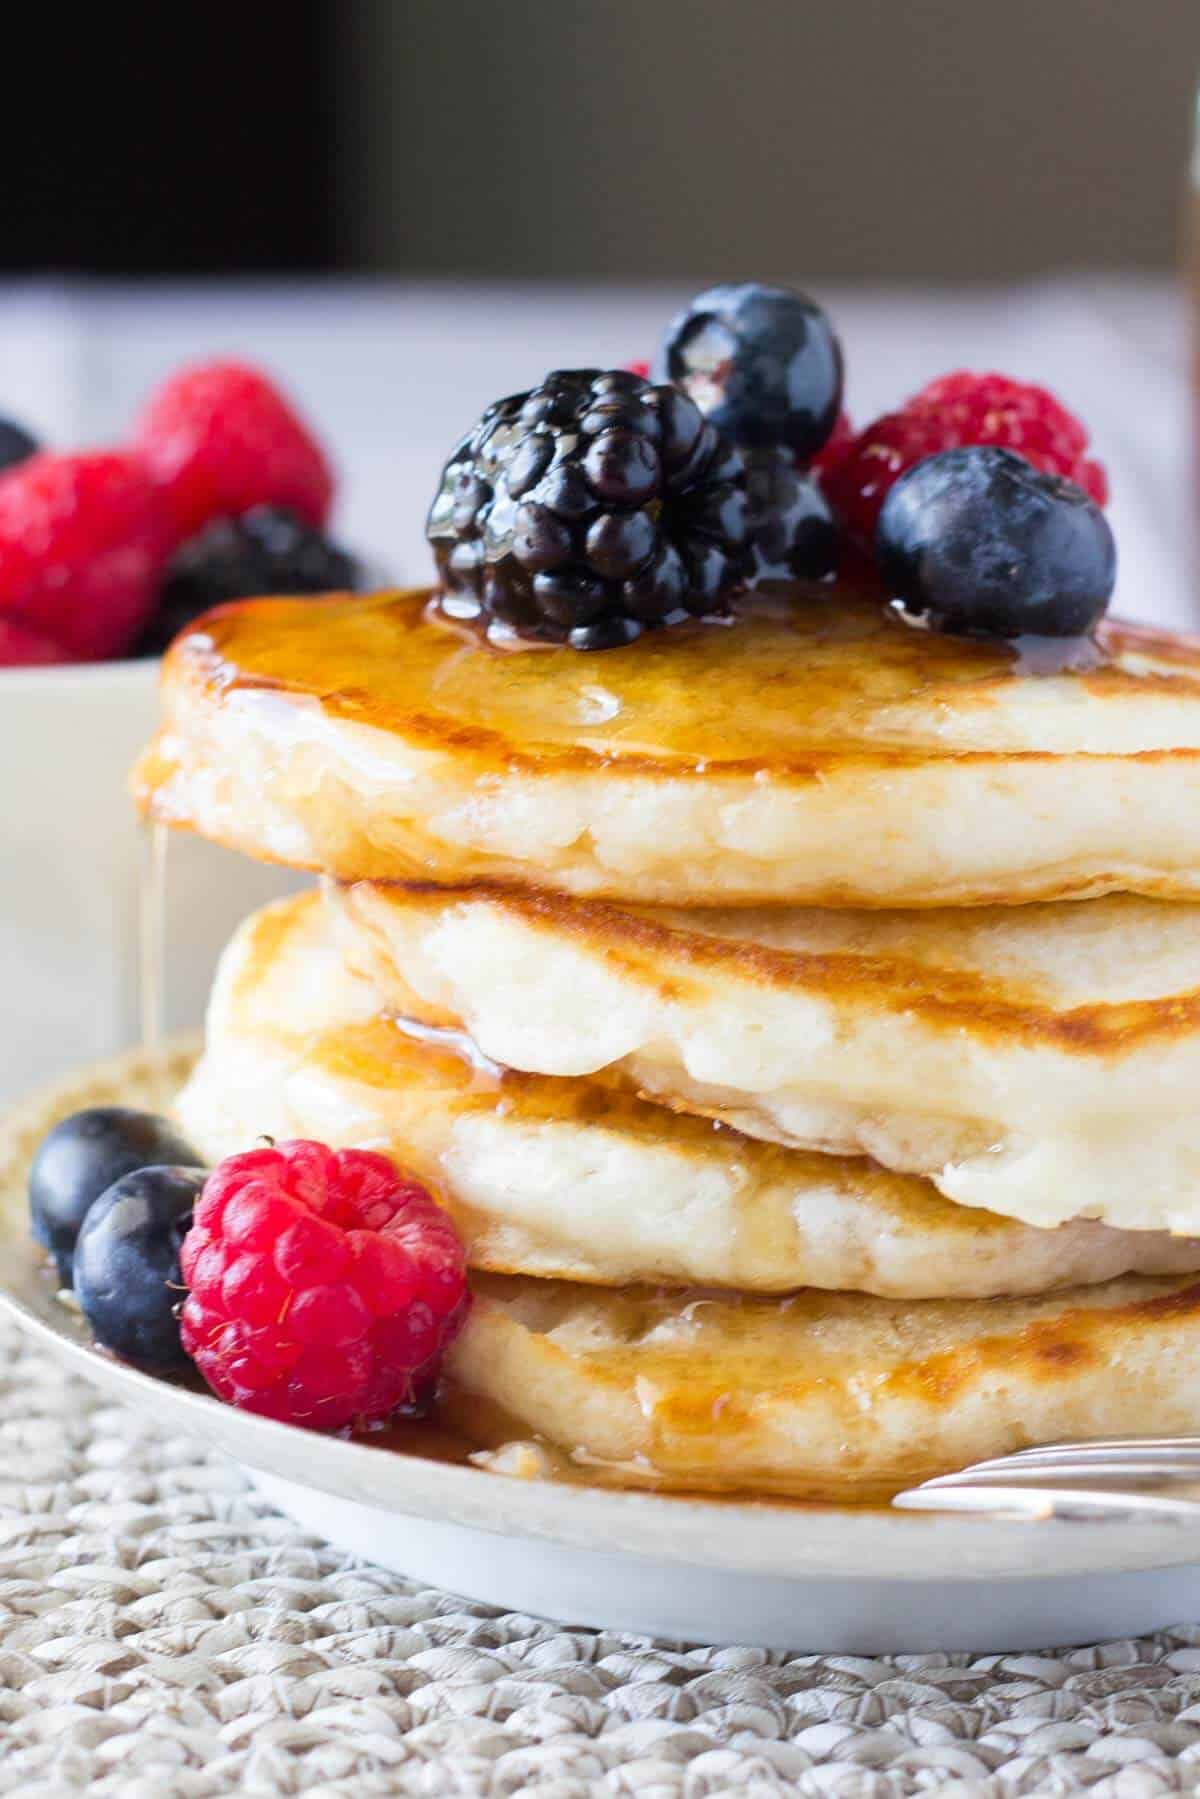 The softest, most fluffy Buttermilk Pancakes imaginable. Perfectly golden edges & designed for soaking up lots of maple syrup - these are the BEST pancakes you'll ever eat!